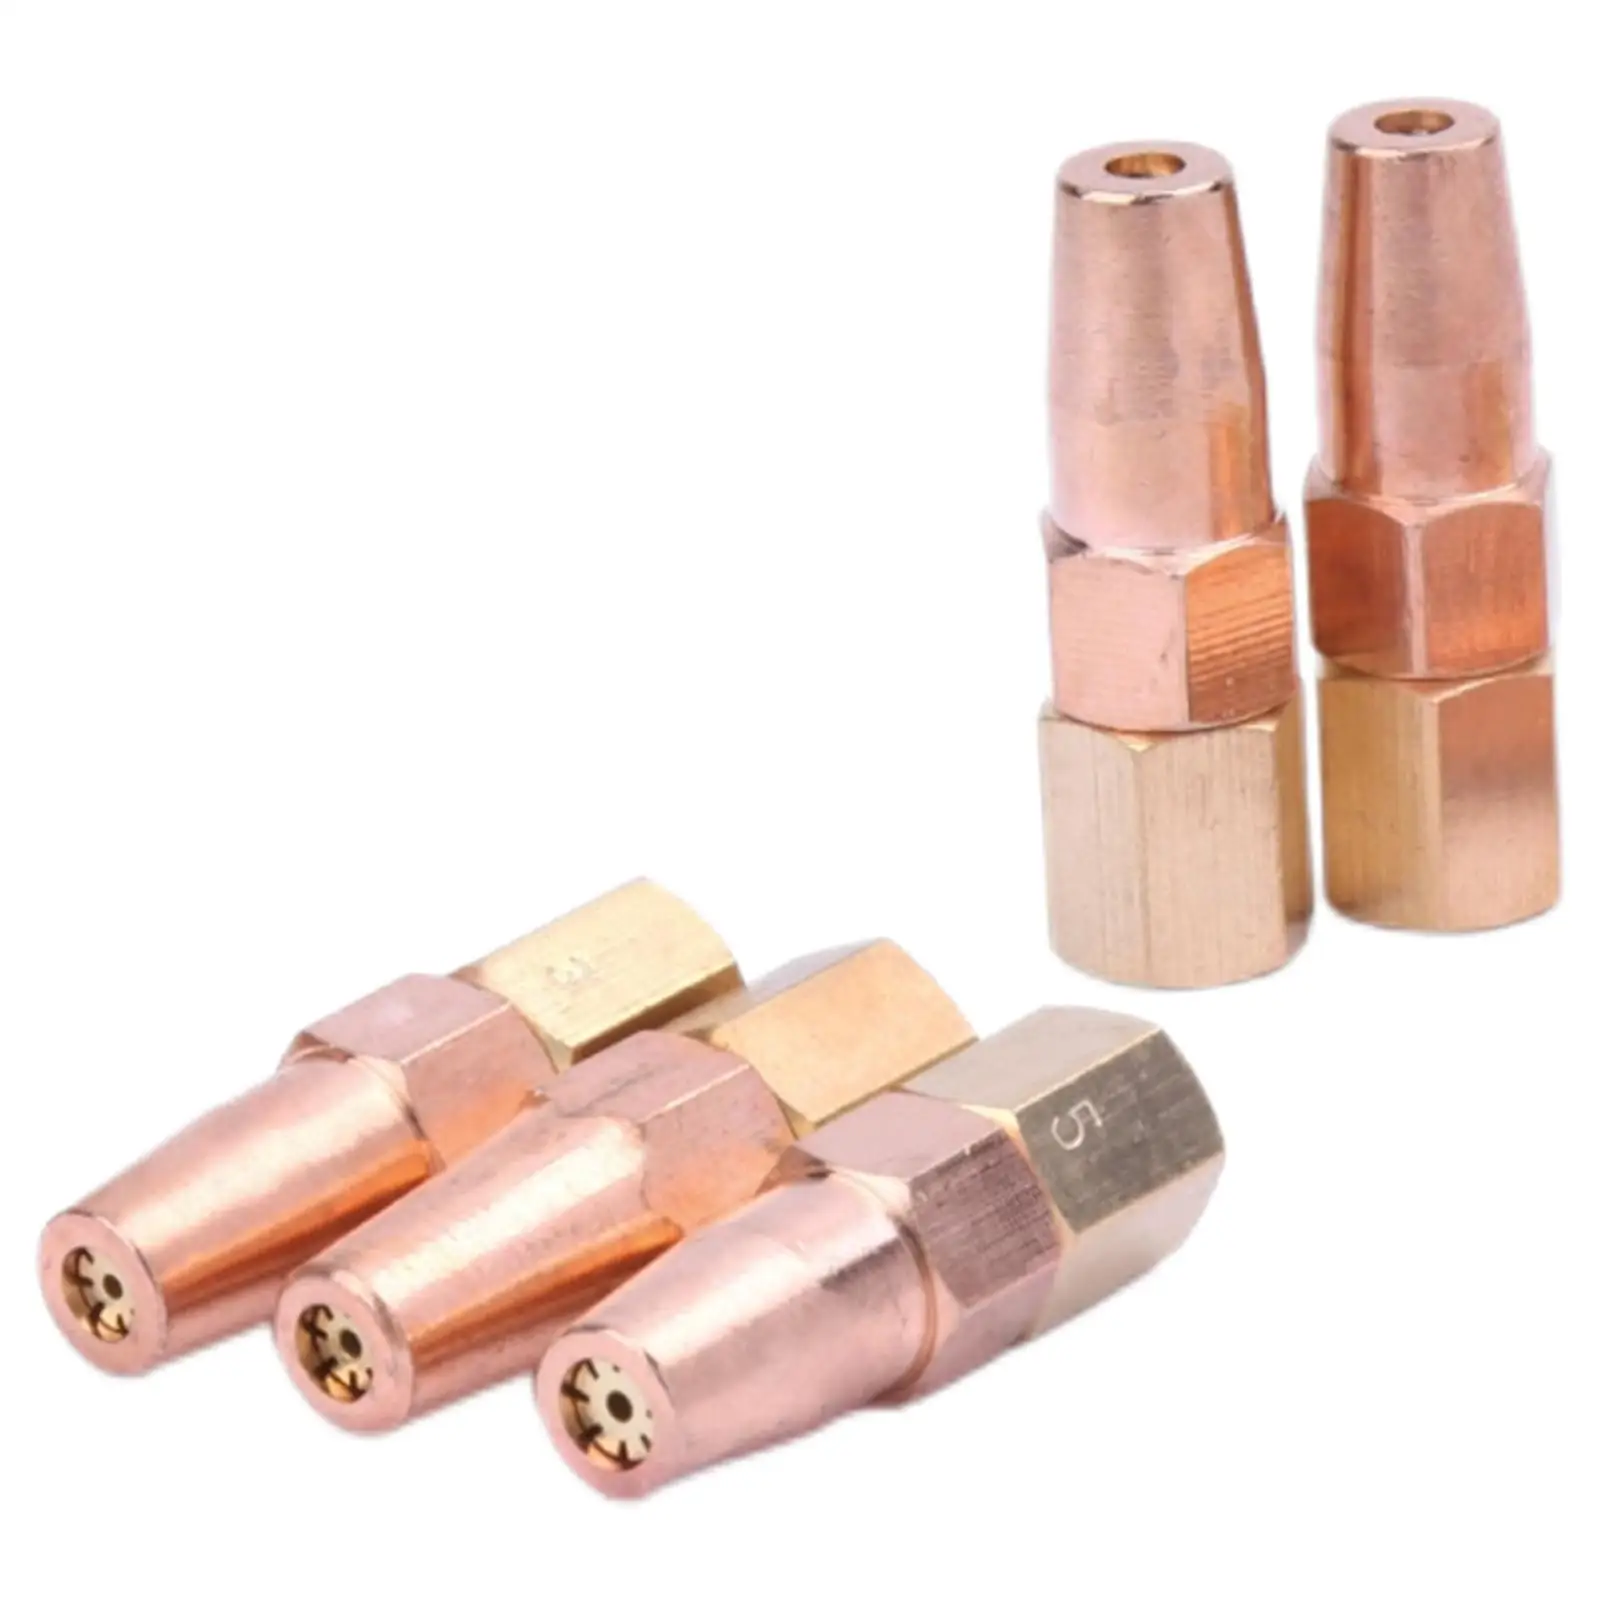 5x Propane Gas Welding Nozzle H01-6 Gas Nozzle for Heat Treating Thermal Metal Expansion Metal Bending Straightening